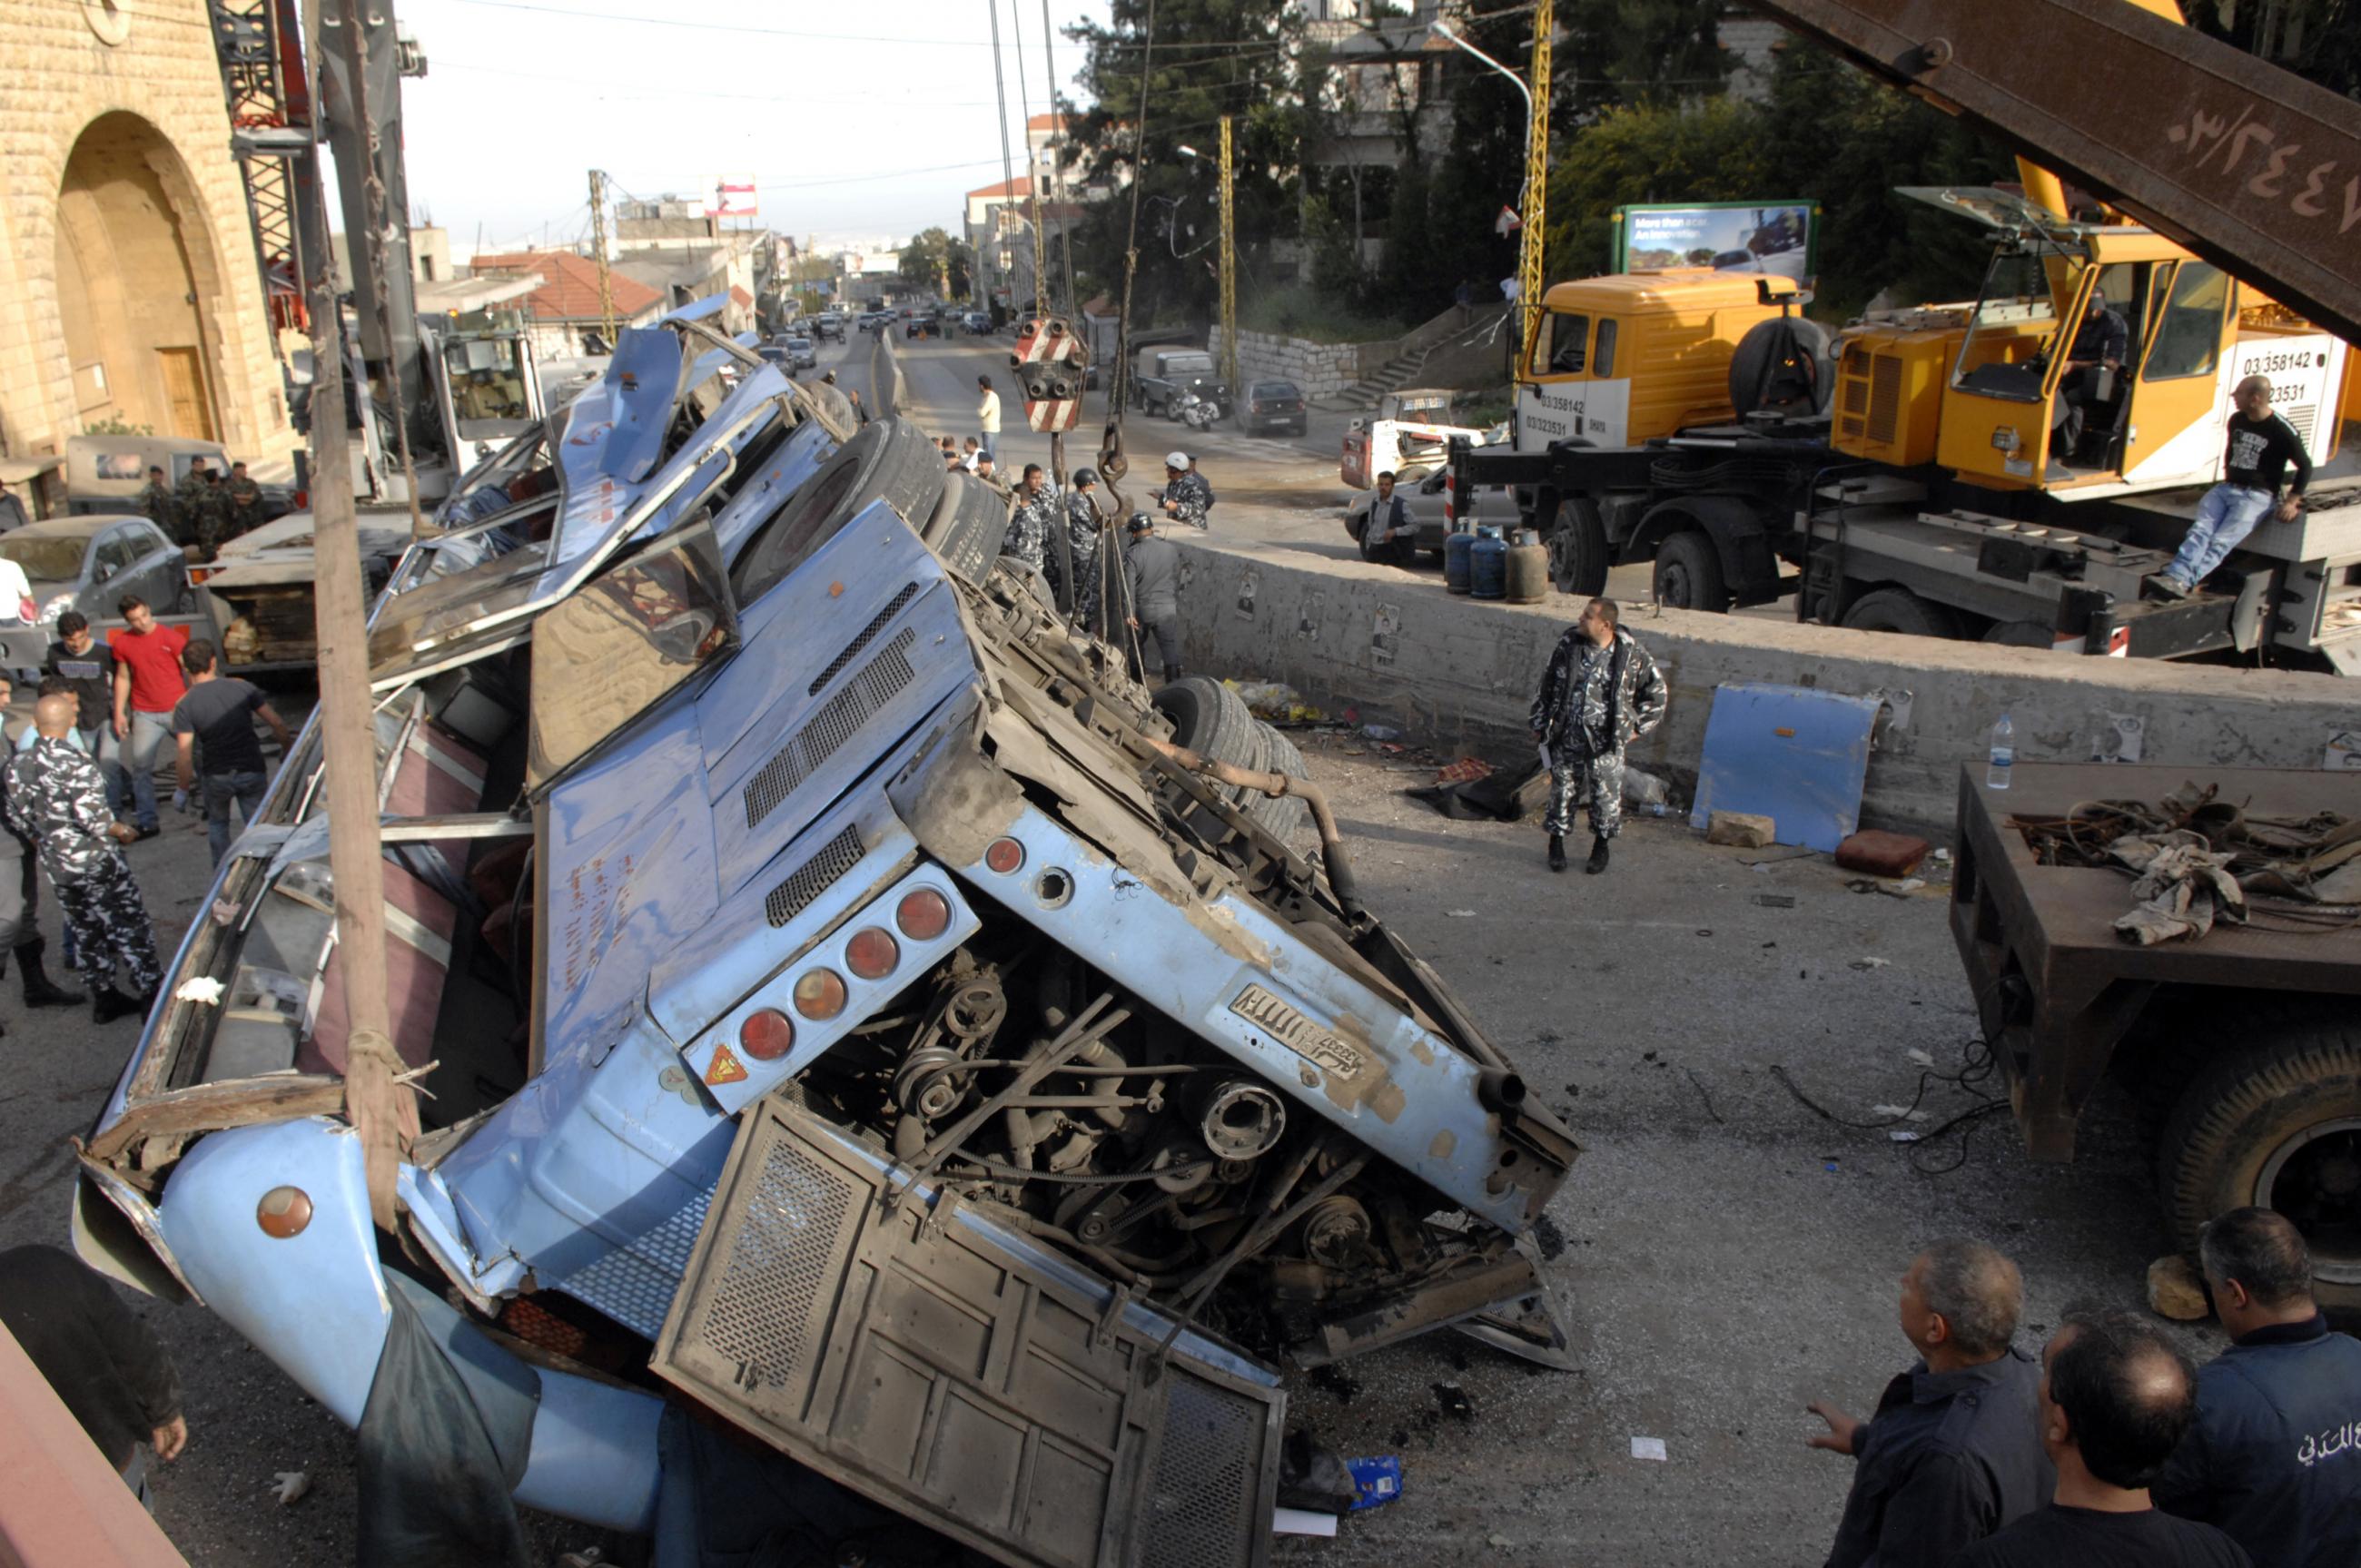 Lebanese policemen inspect the wreckage of a bus that overturned in an accident in Kahale, east Beirut March 15, 2013. 